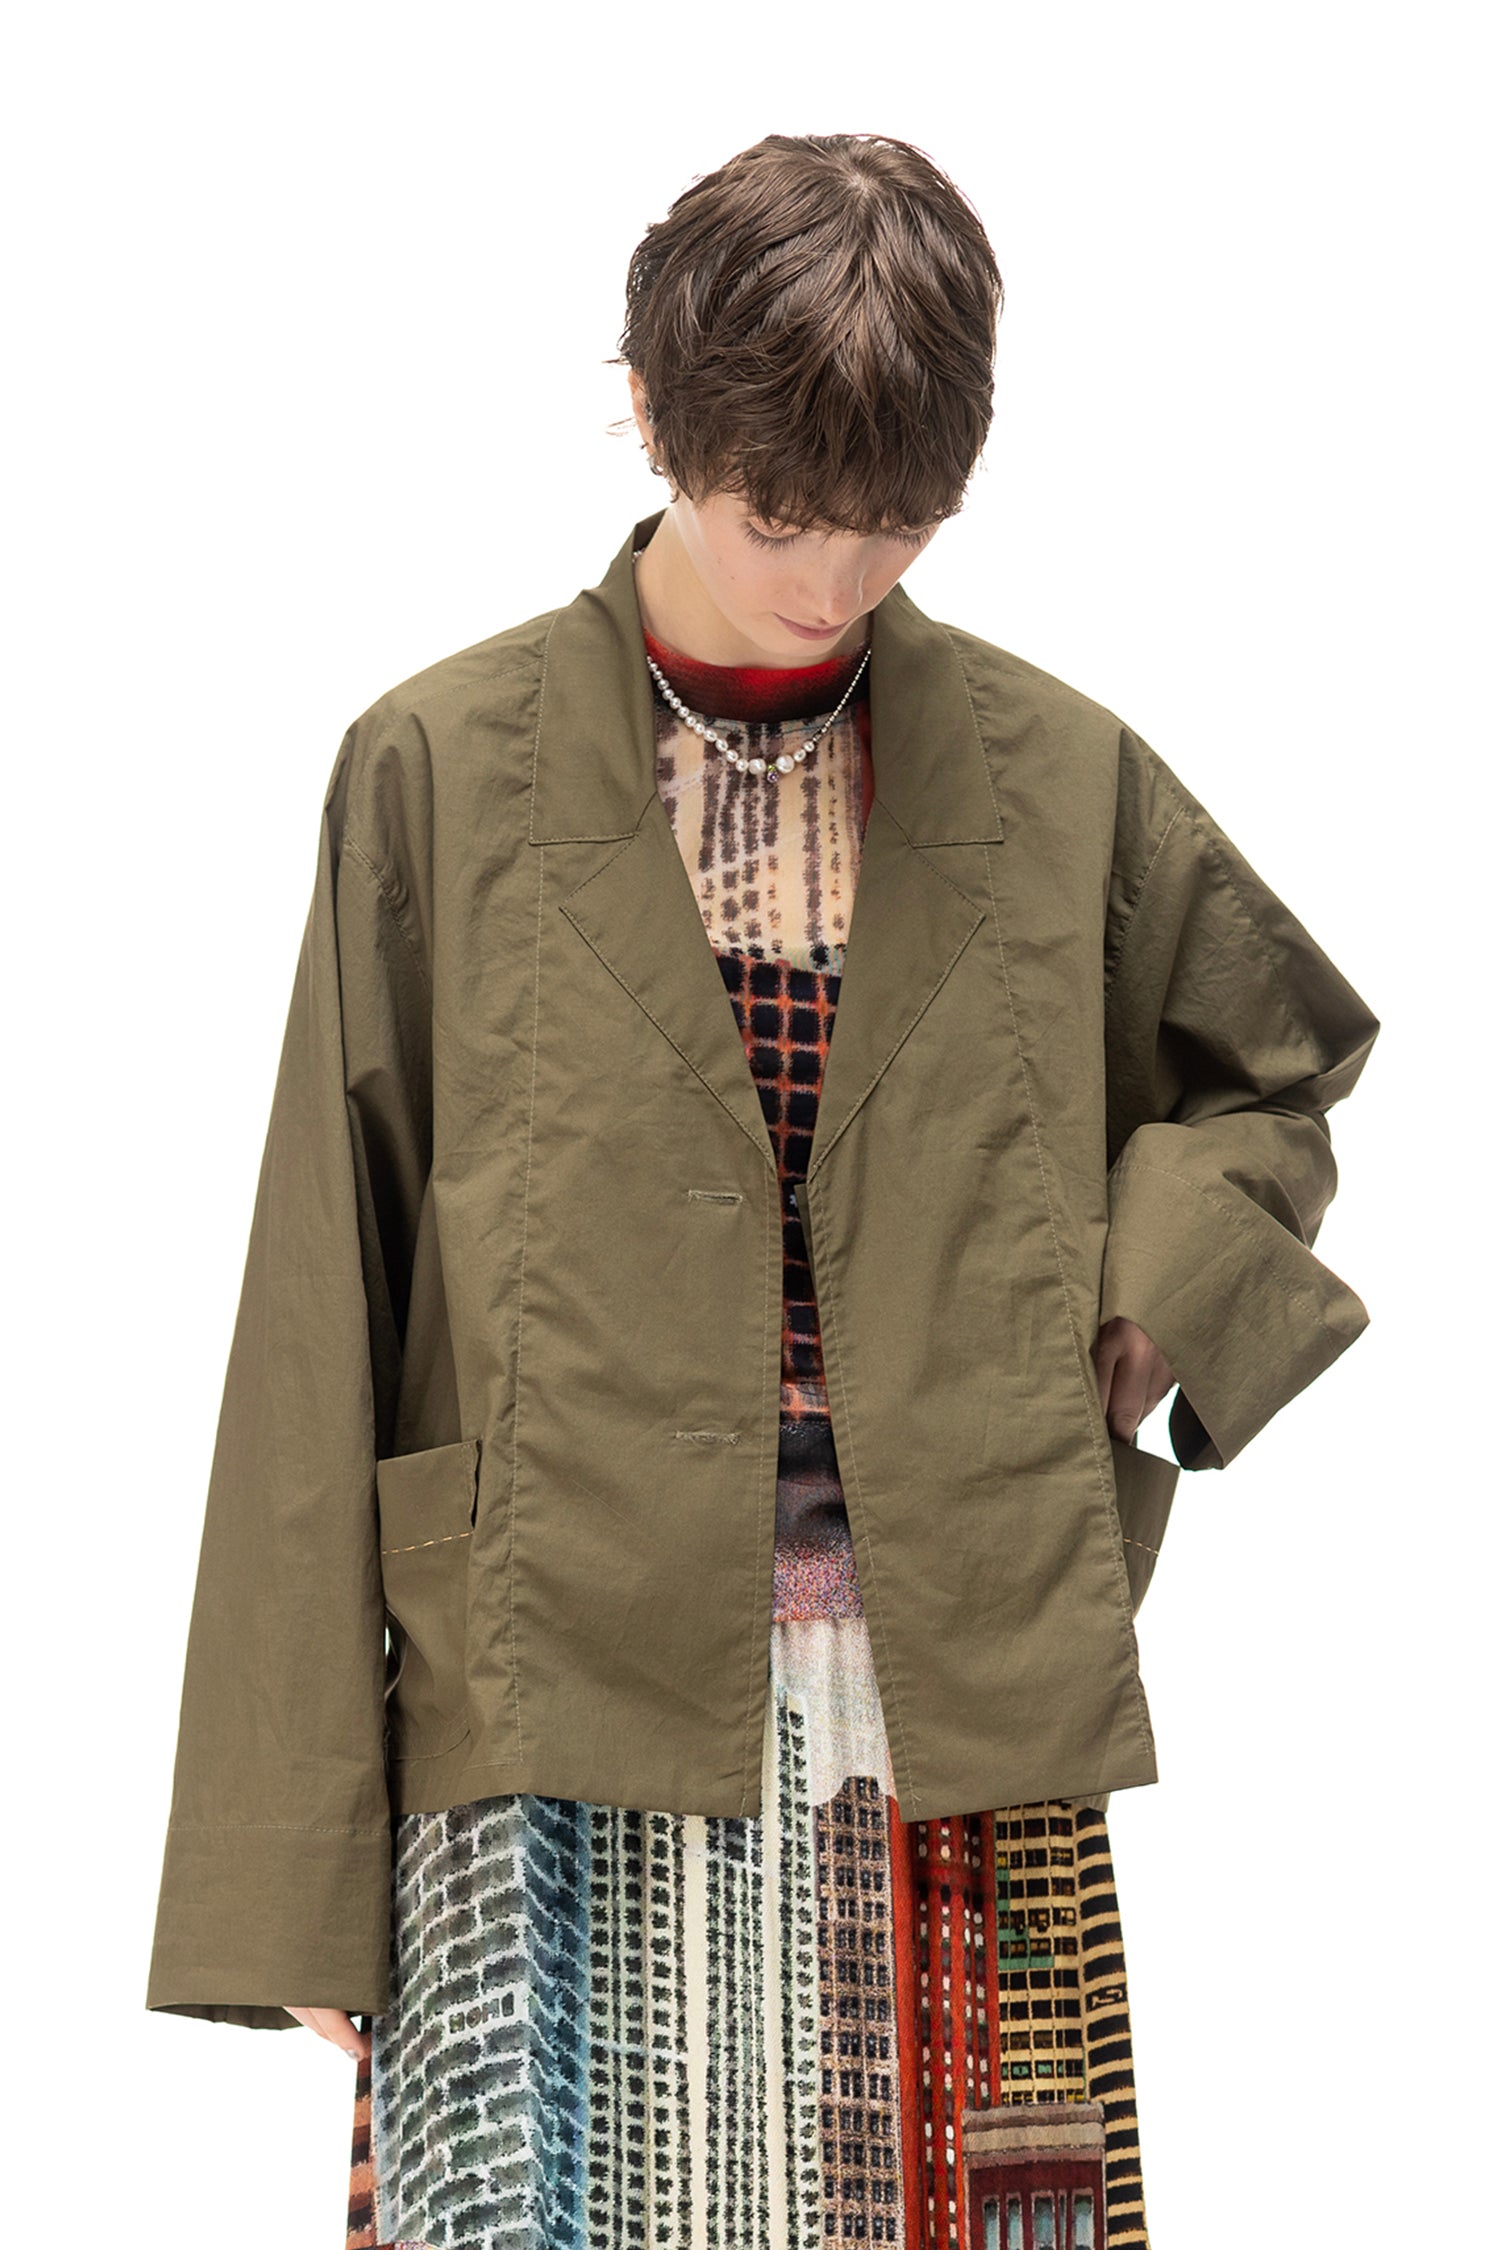 TOWN JACKET IN CAPER, S24